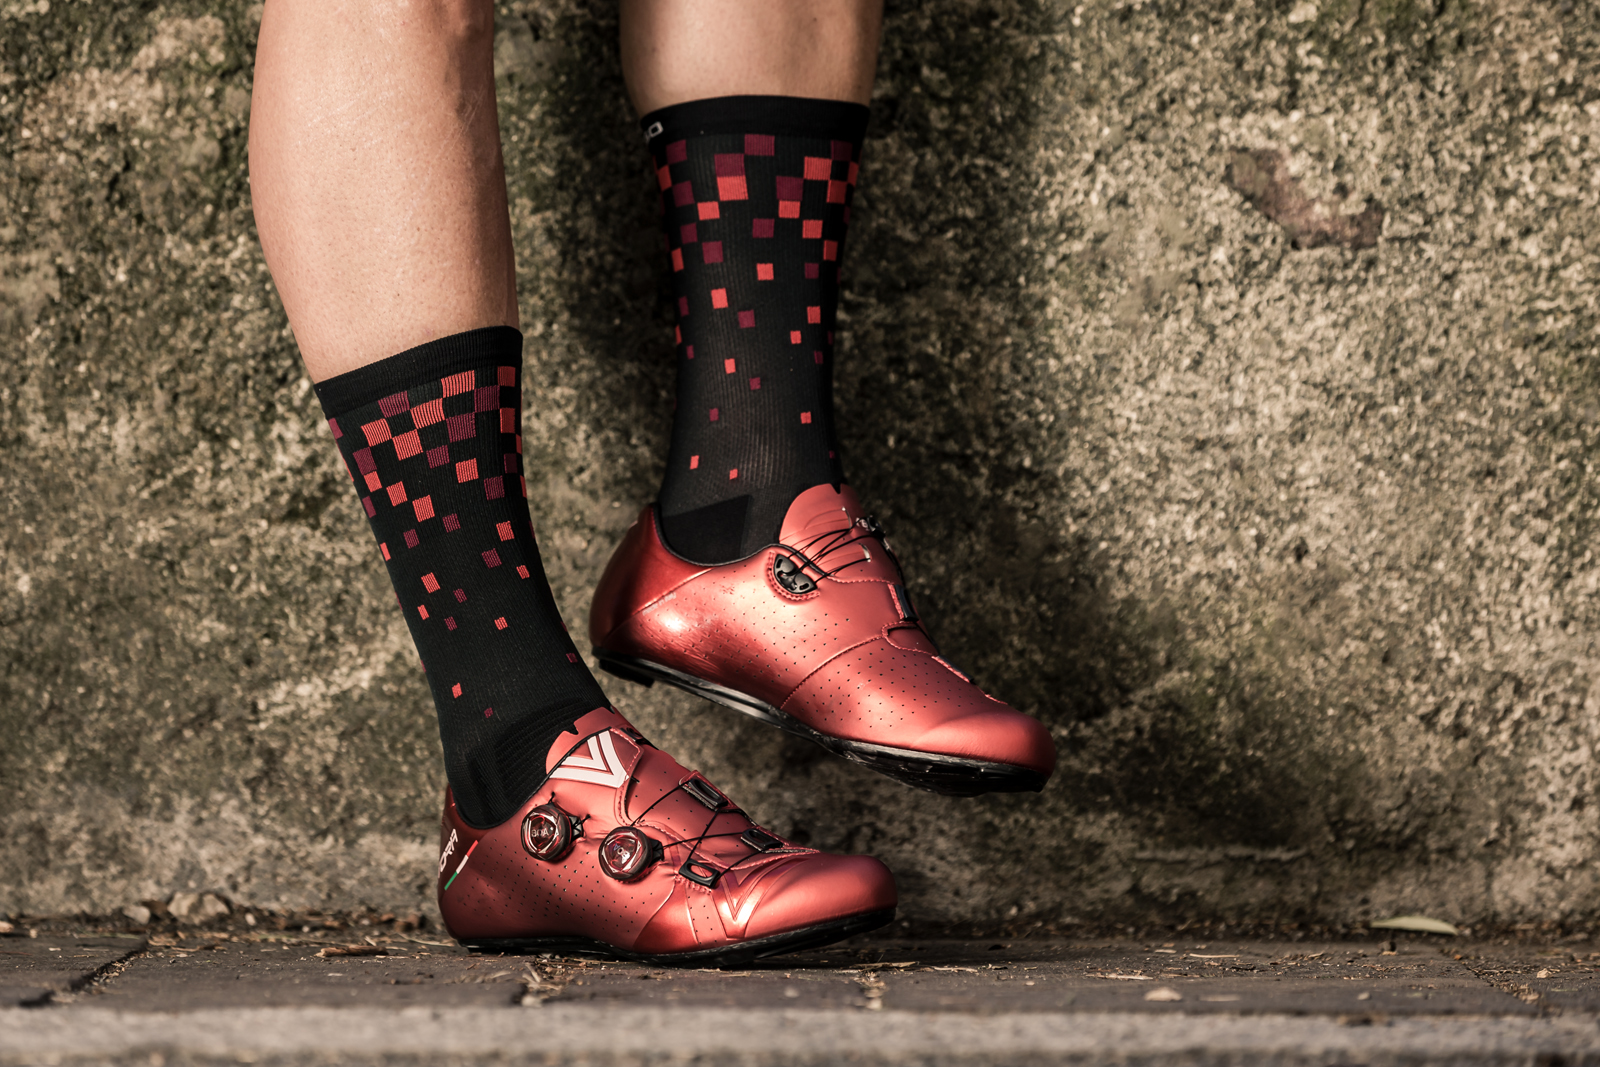 Oxeego - 3x1 Cycling socks PIXELS